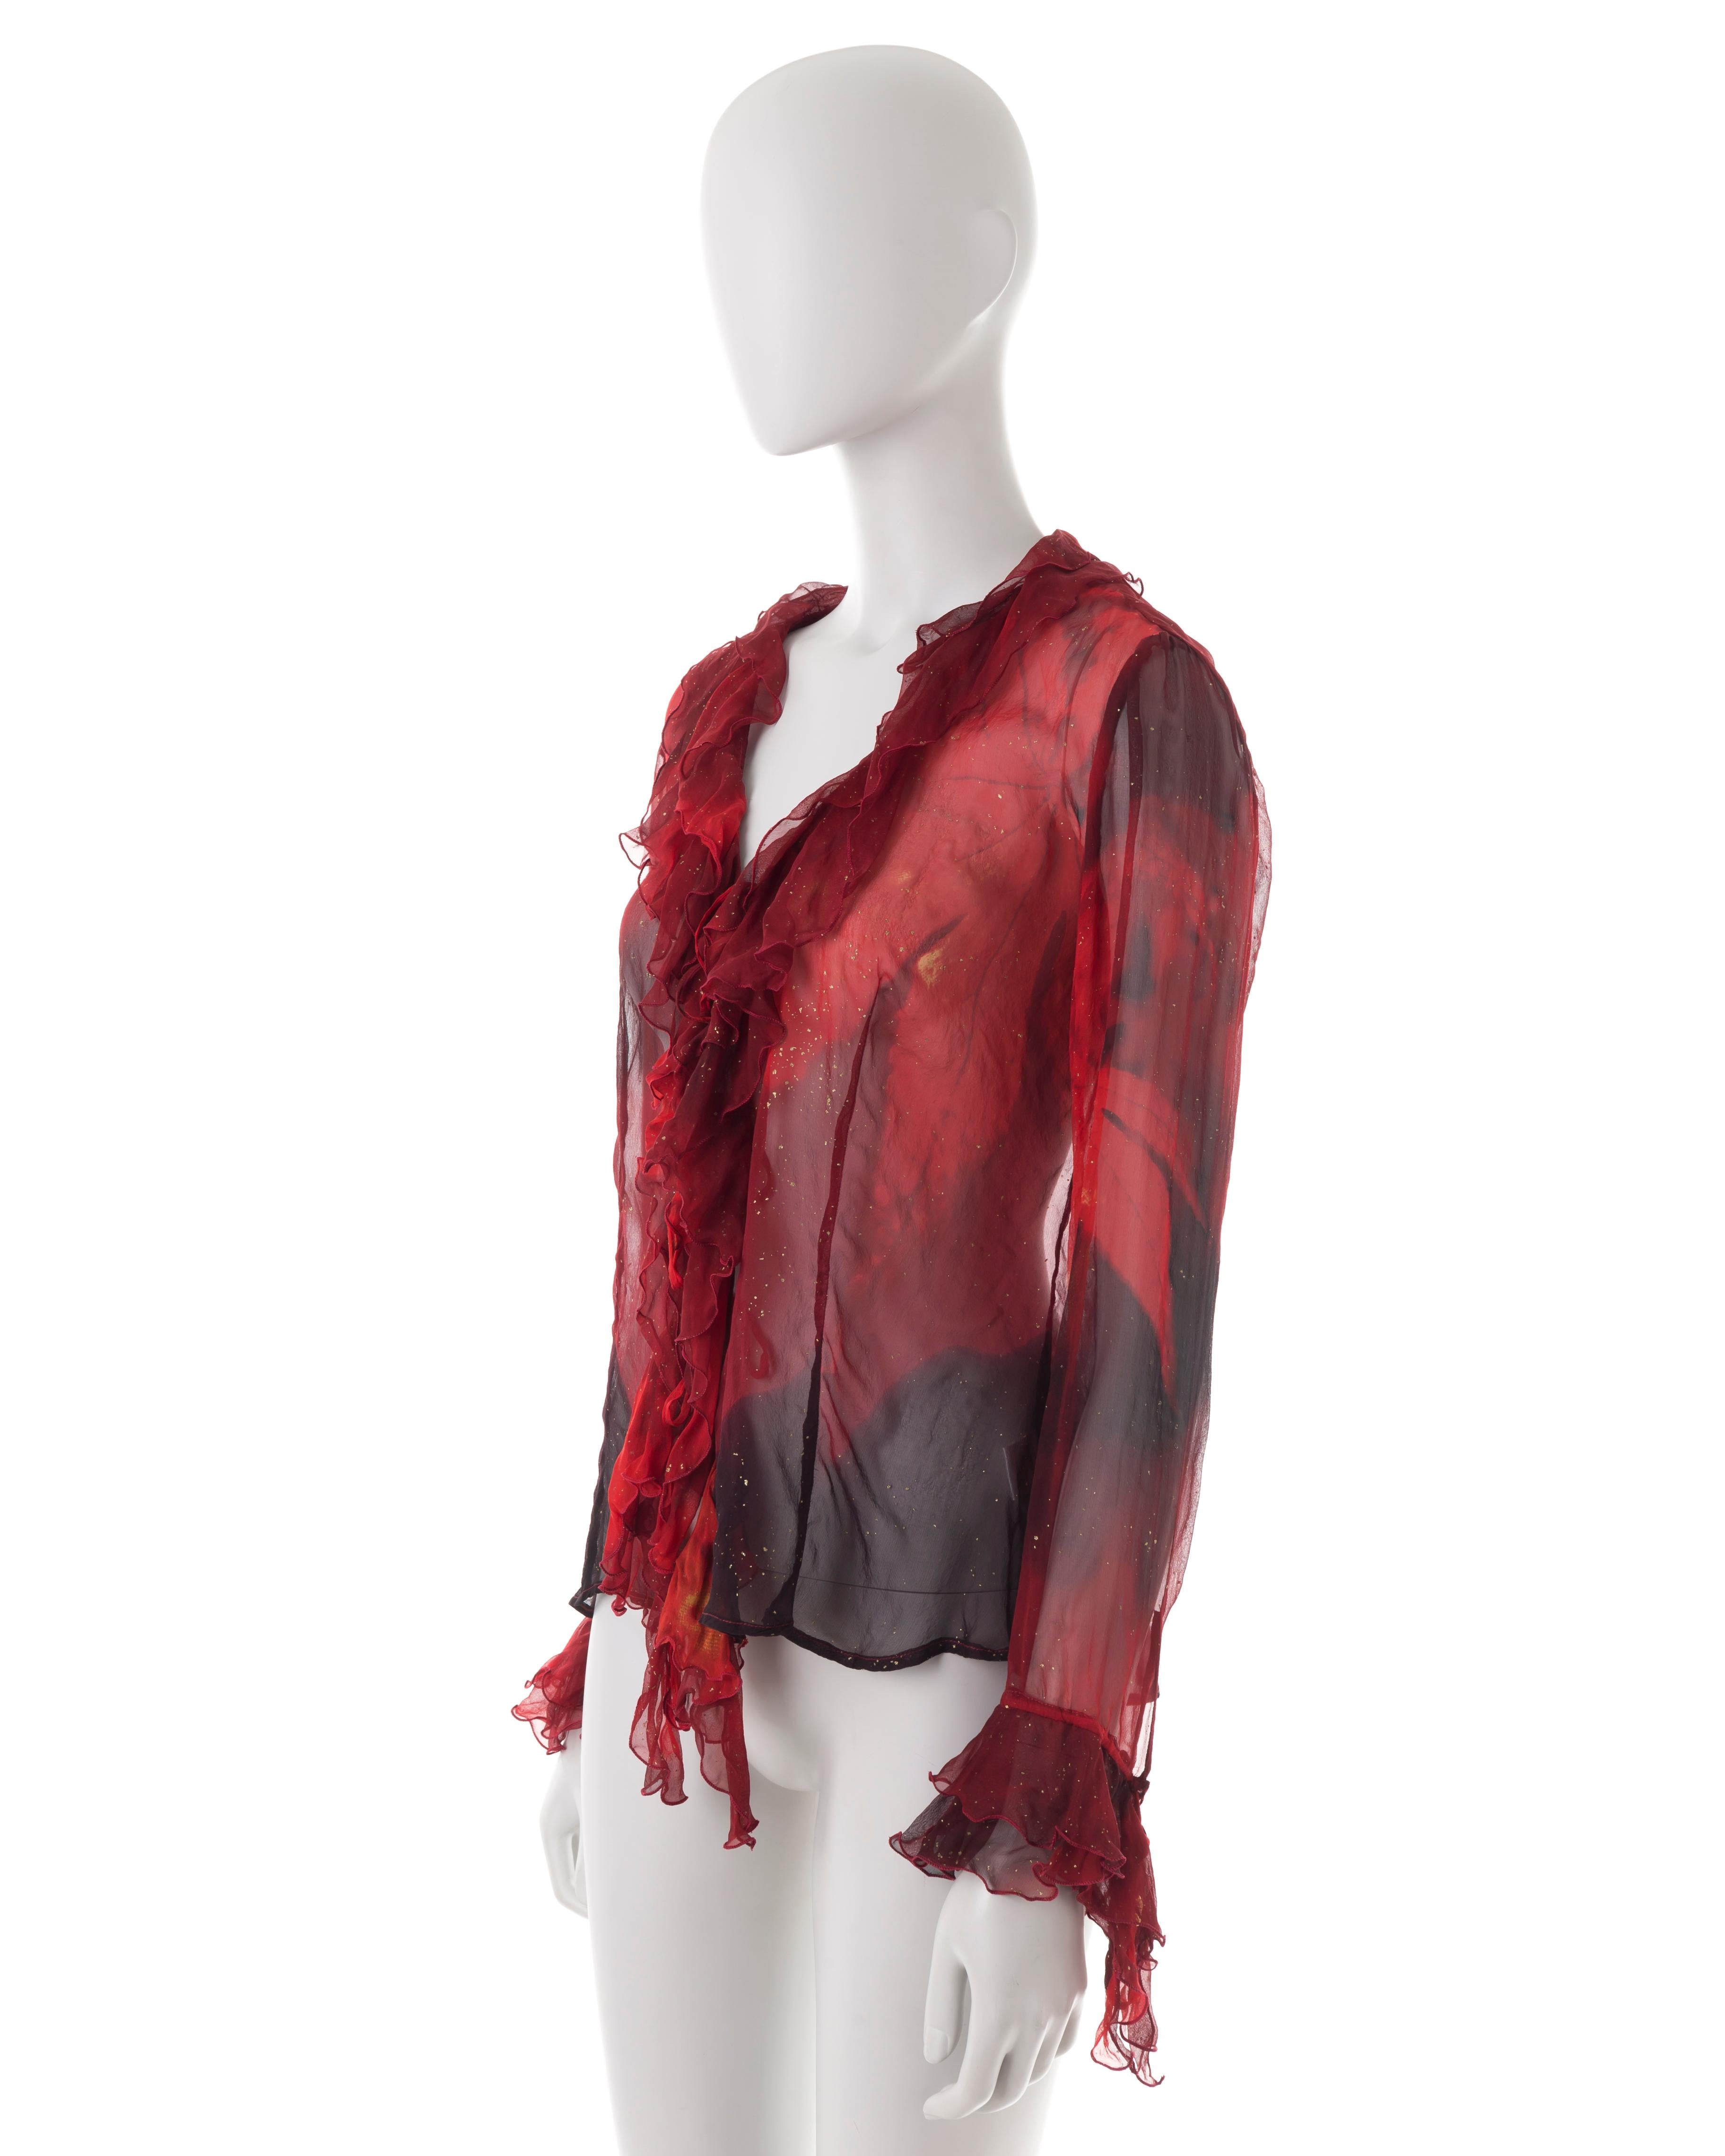 - Silk chiffon blouse
- Front and cuff ruffles
- Red and black glitter leaf print
- Triple front ties fastening
